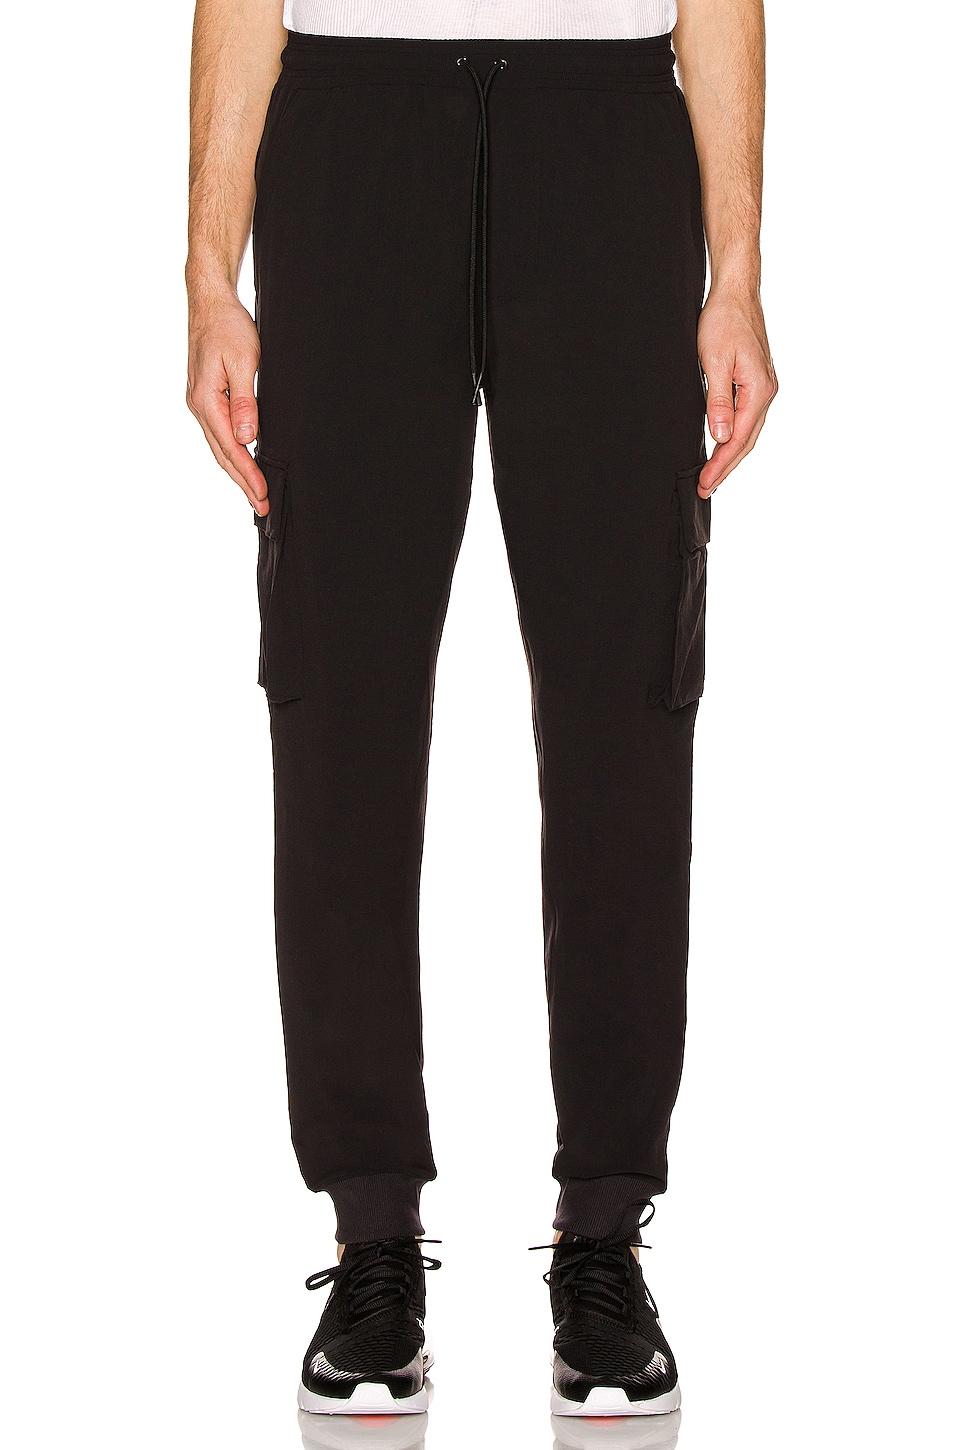 Alo Cargo Pocket Athletic Pants for Women